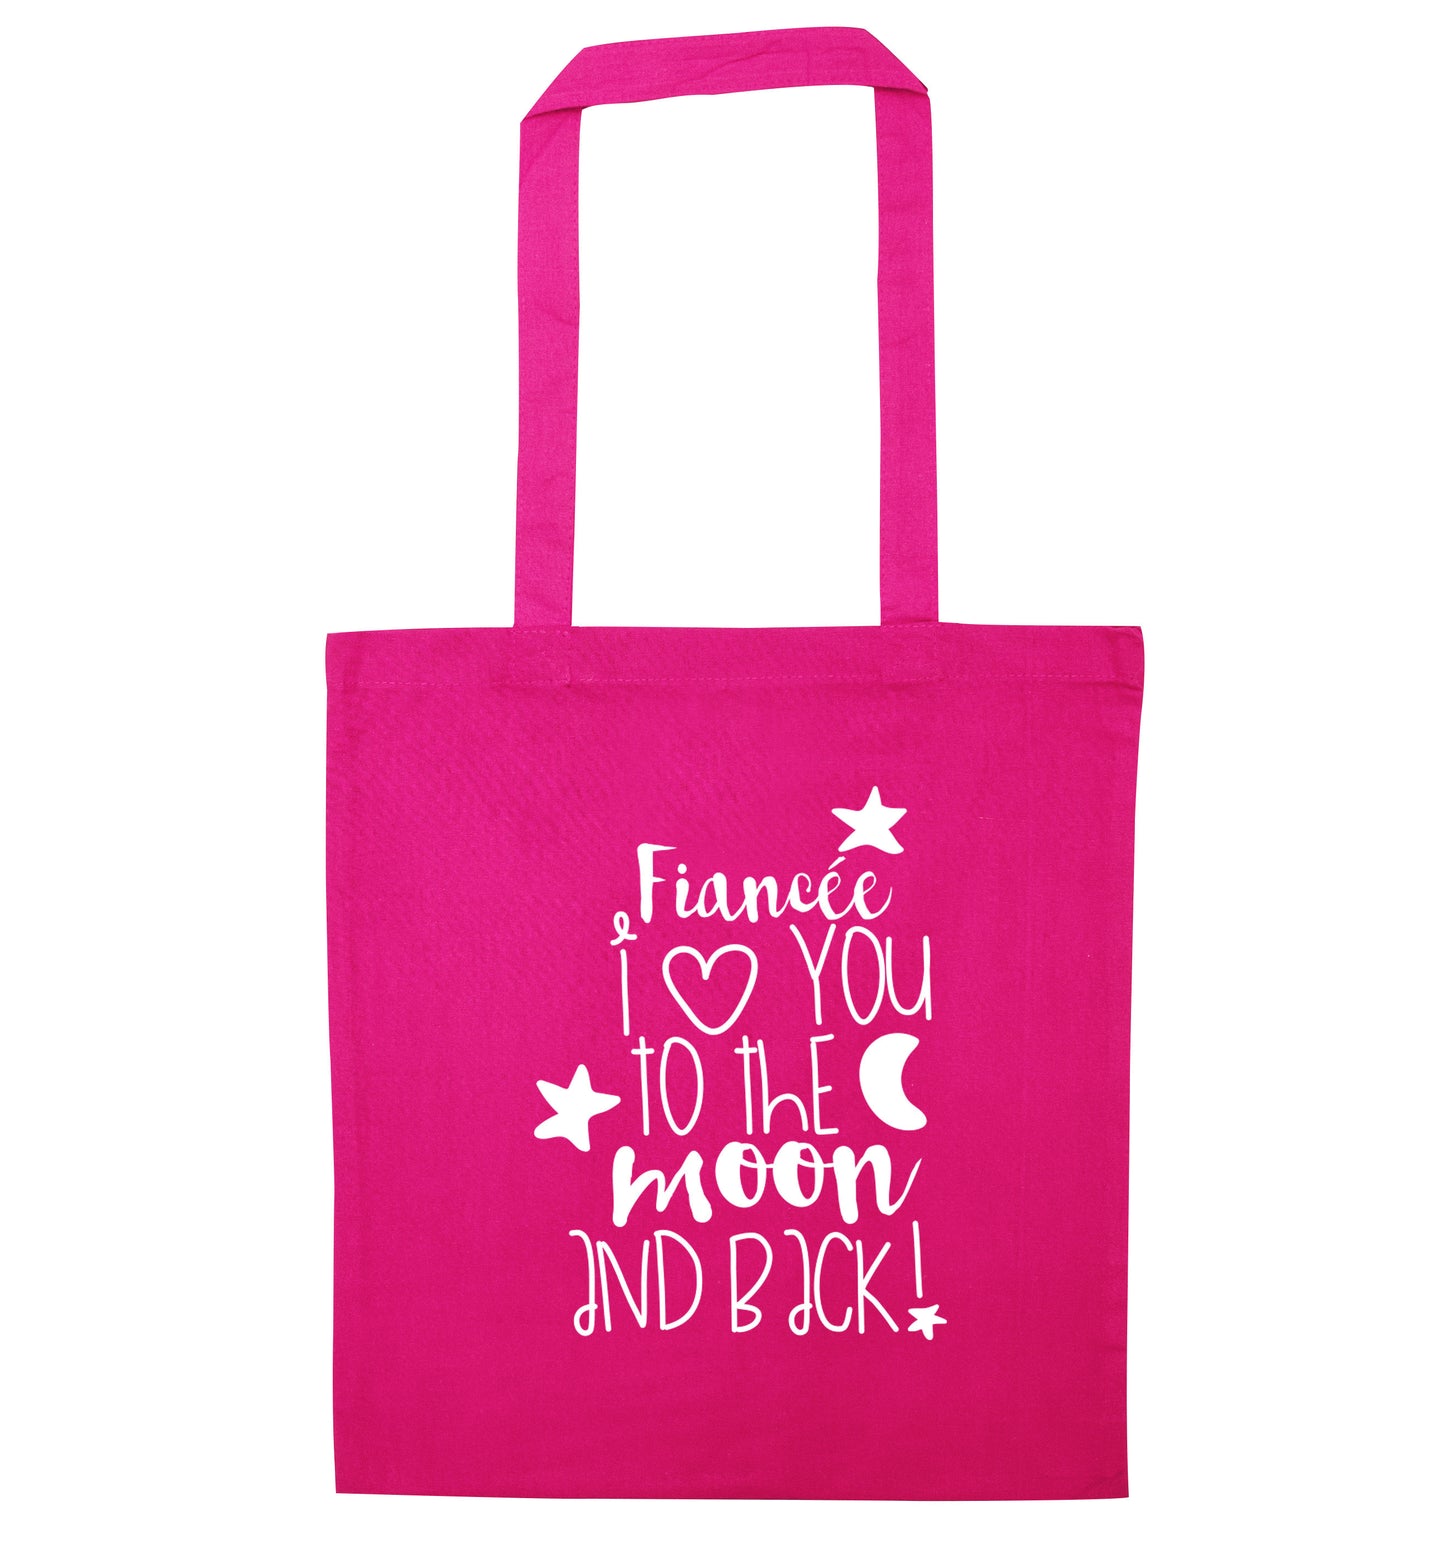 Fianc?_e I love you to the moon and back pink tote bag